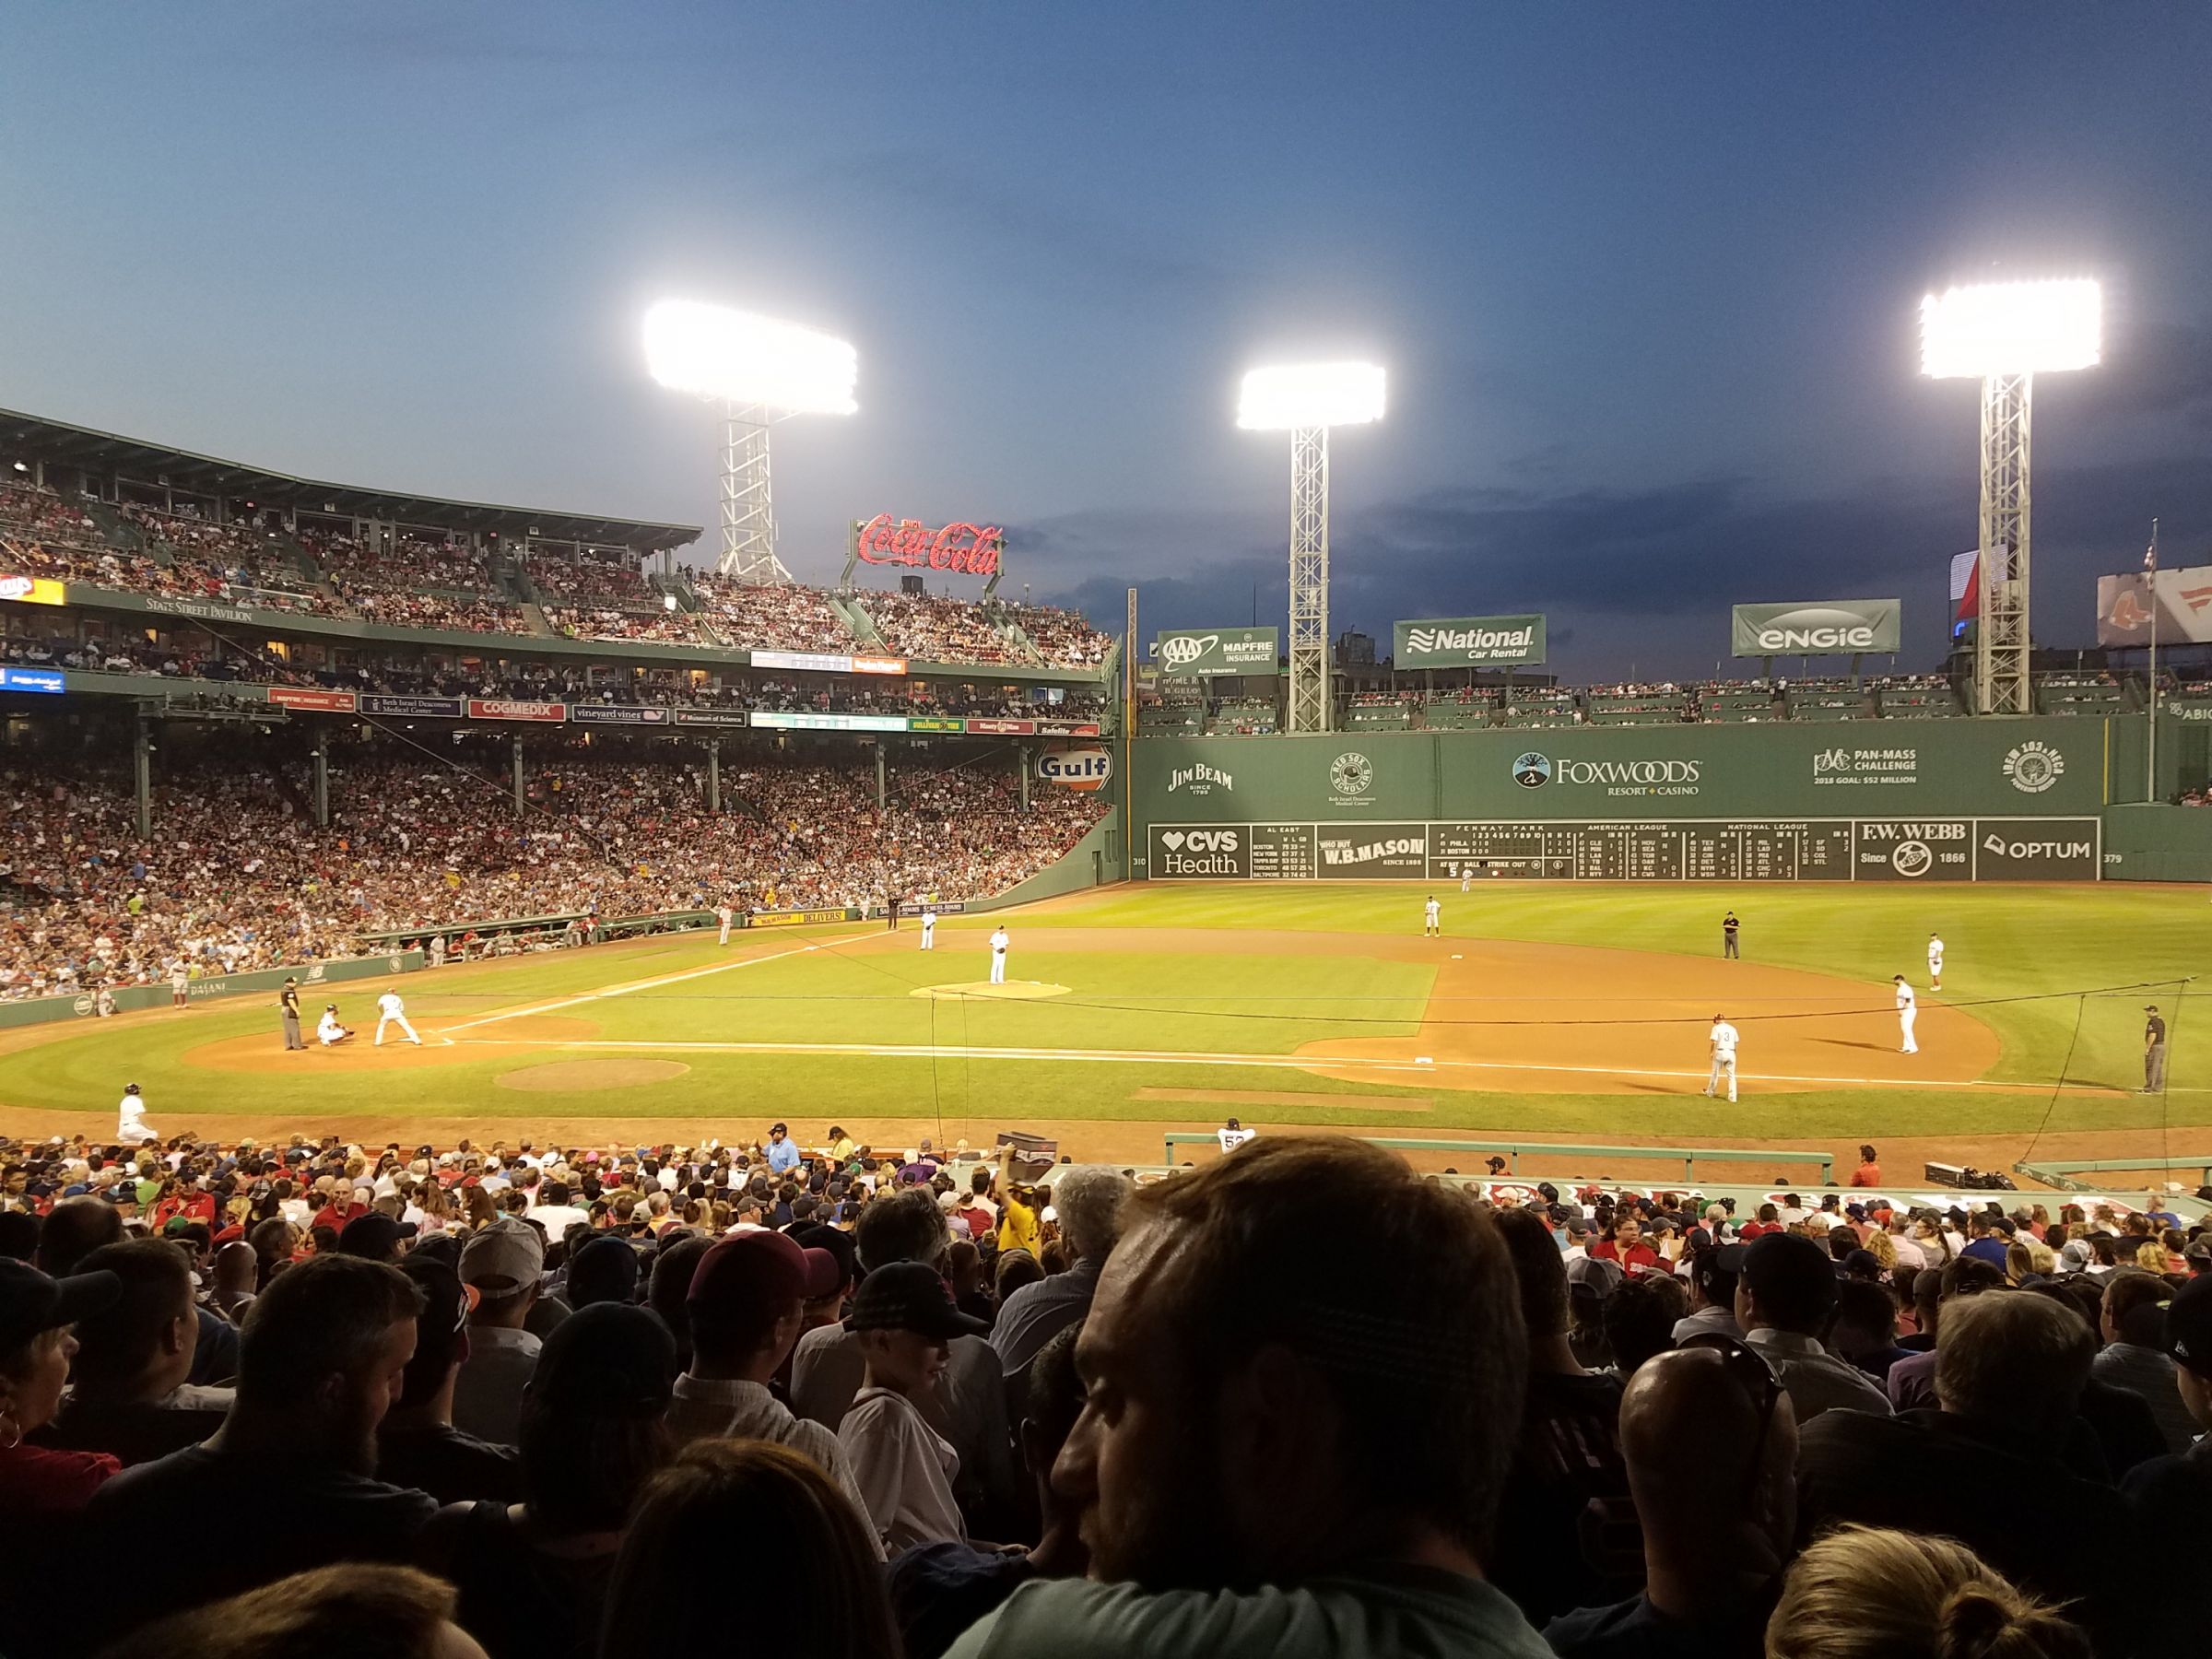 grandstand 15, row 4 seat view  for baseball - fenway park